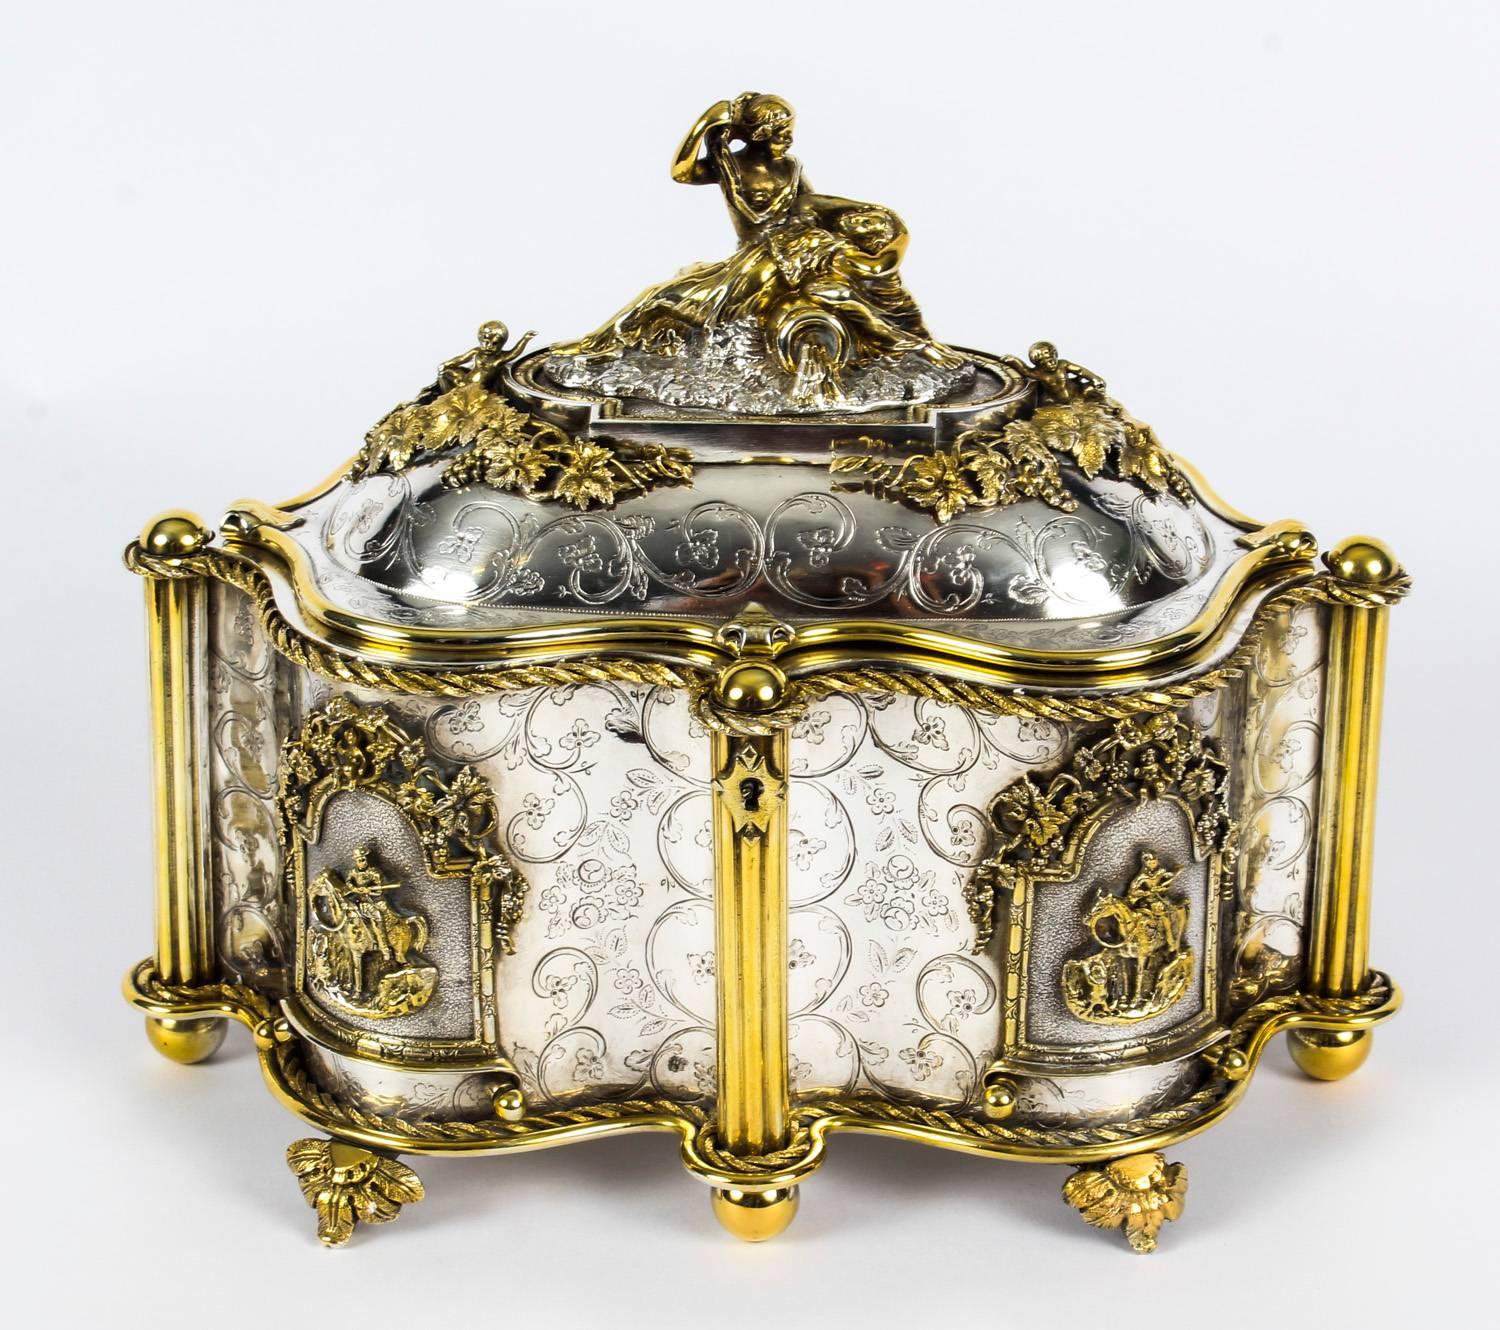 Gilt Antique Large French Gold and Silver Plated Oval Casket 19th Century